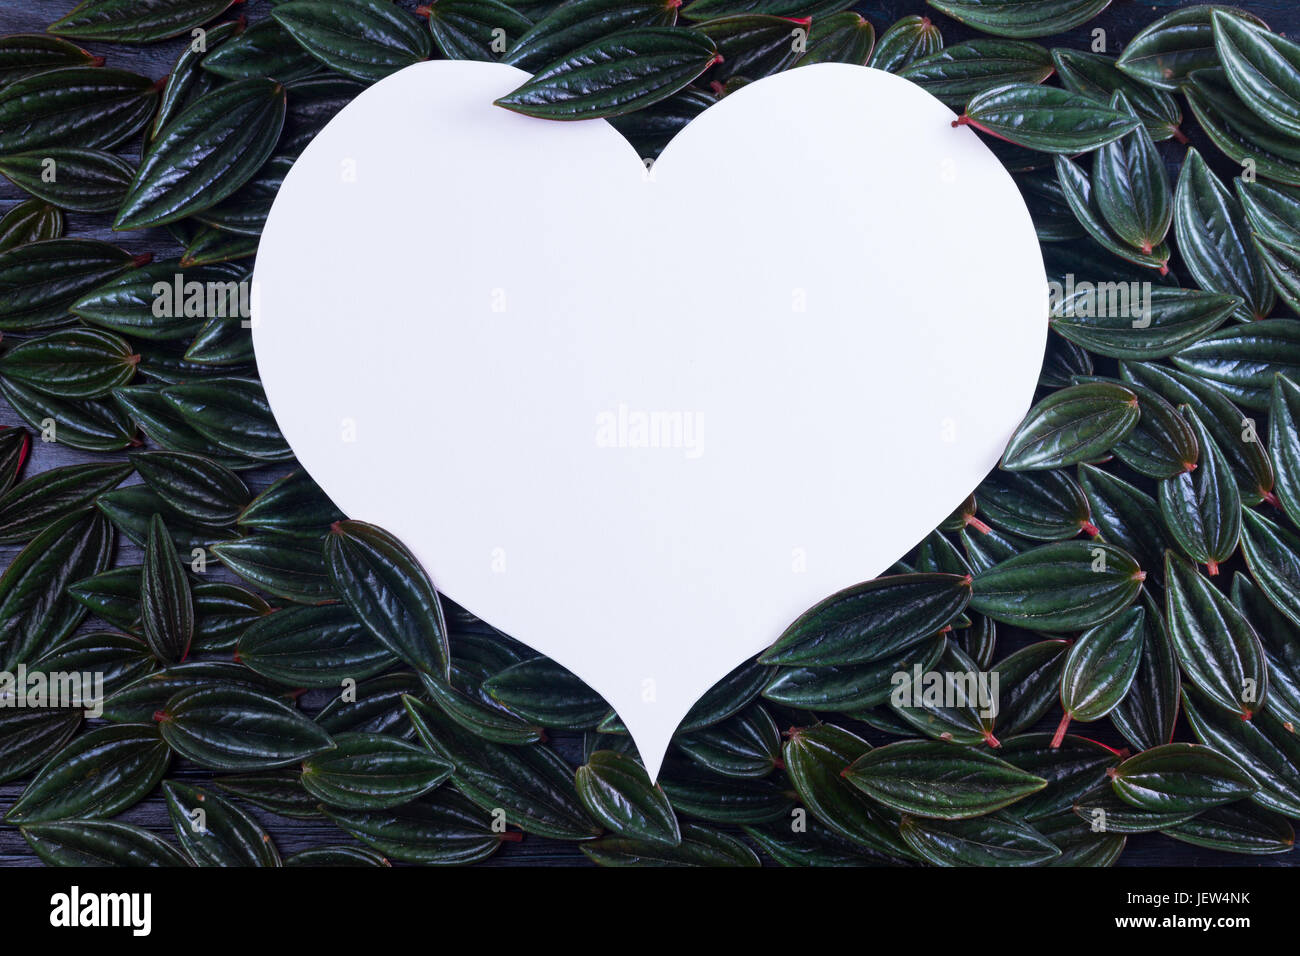 fresh green exotic leaves frame with copy space on empty paper note in shape of heart Stock Photo